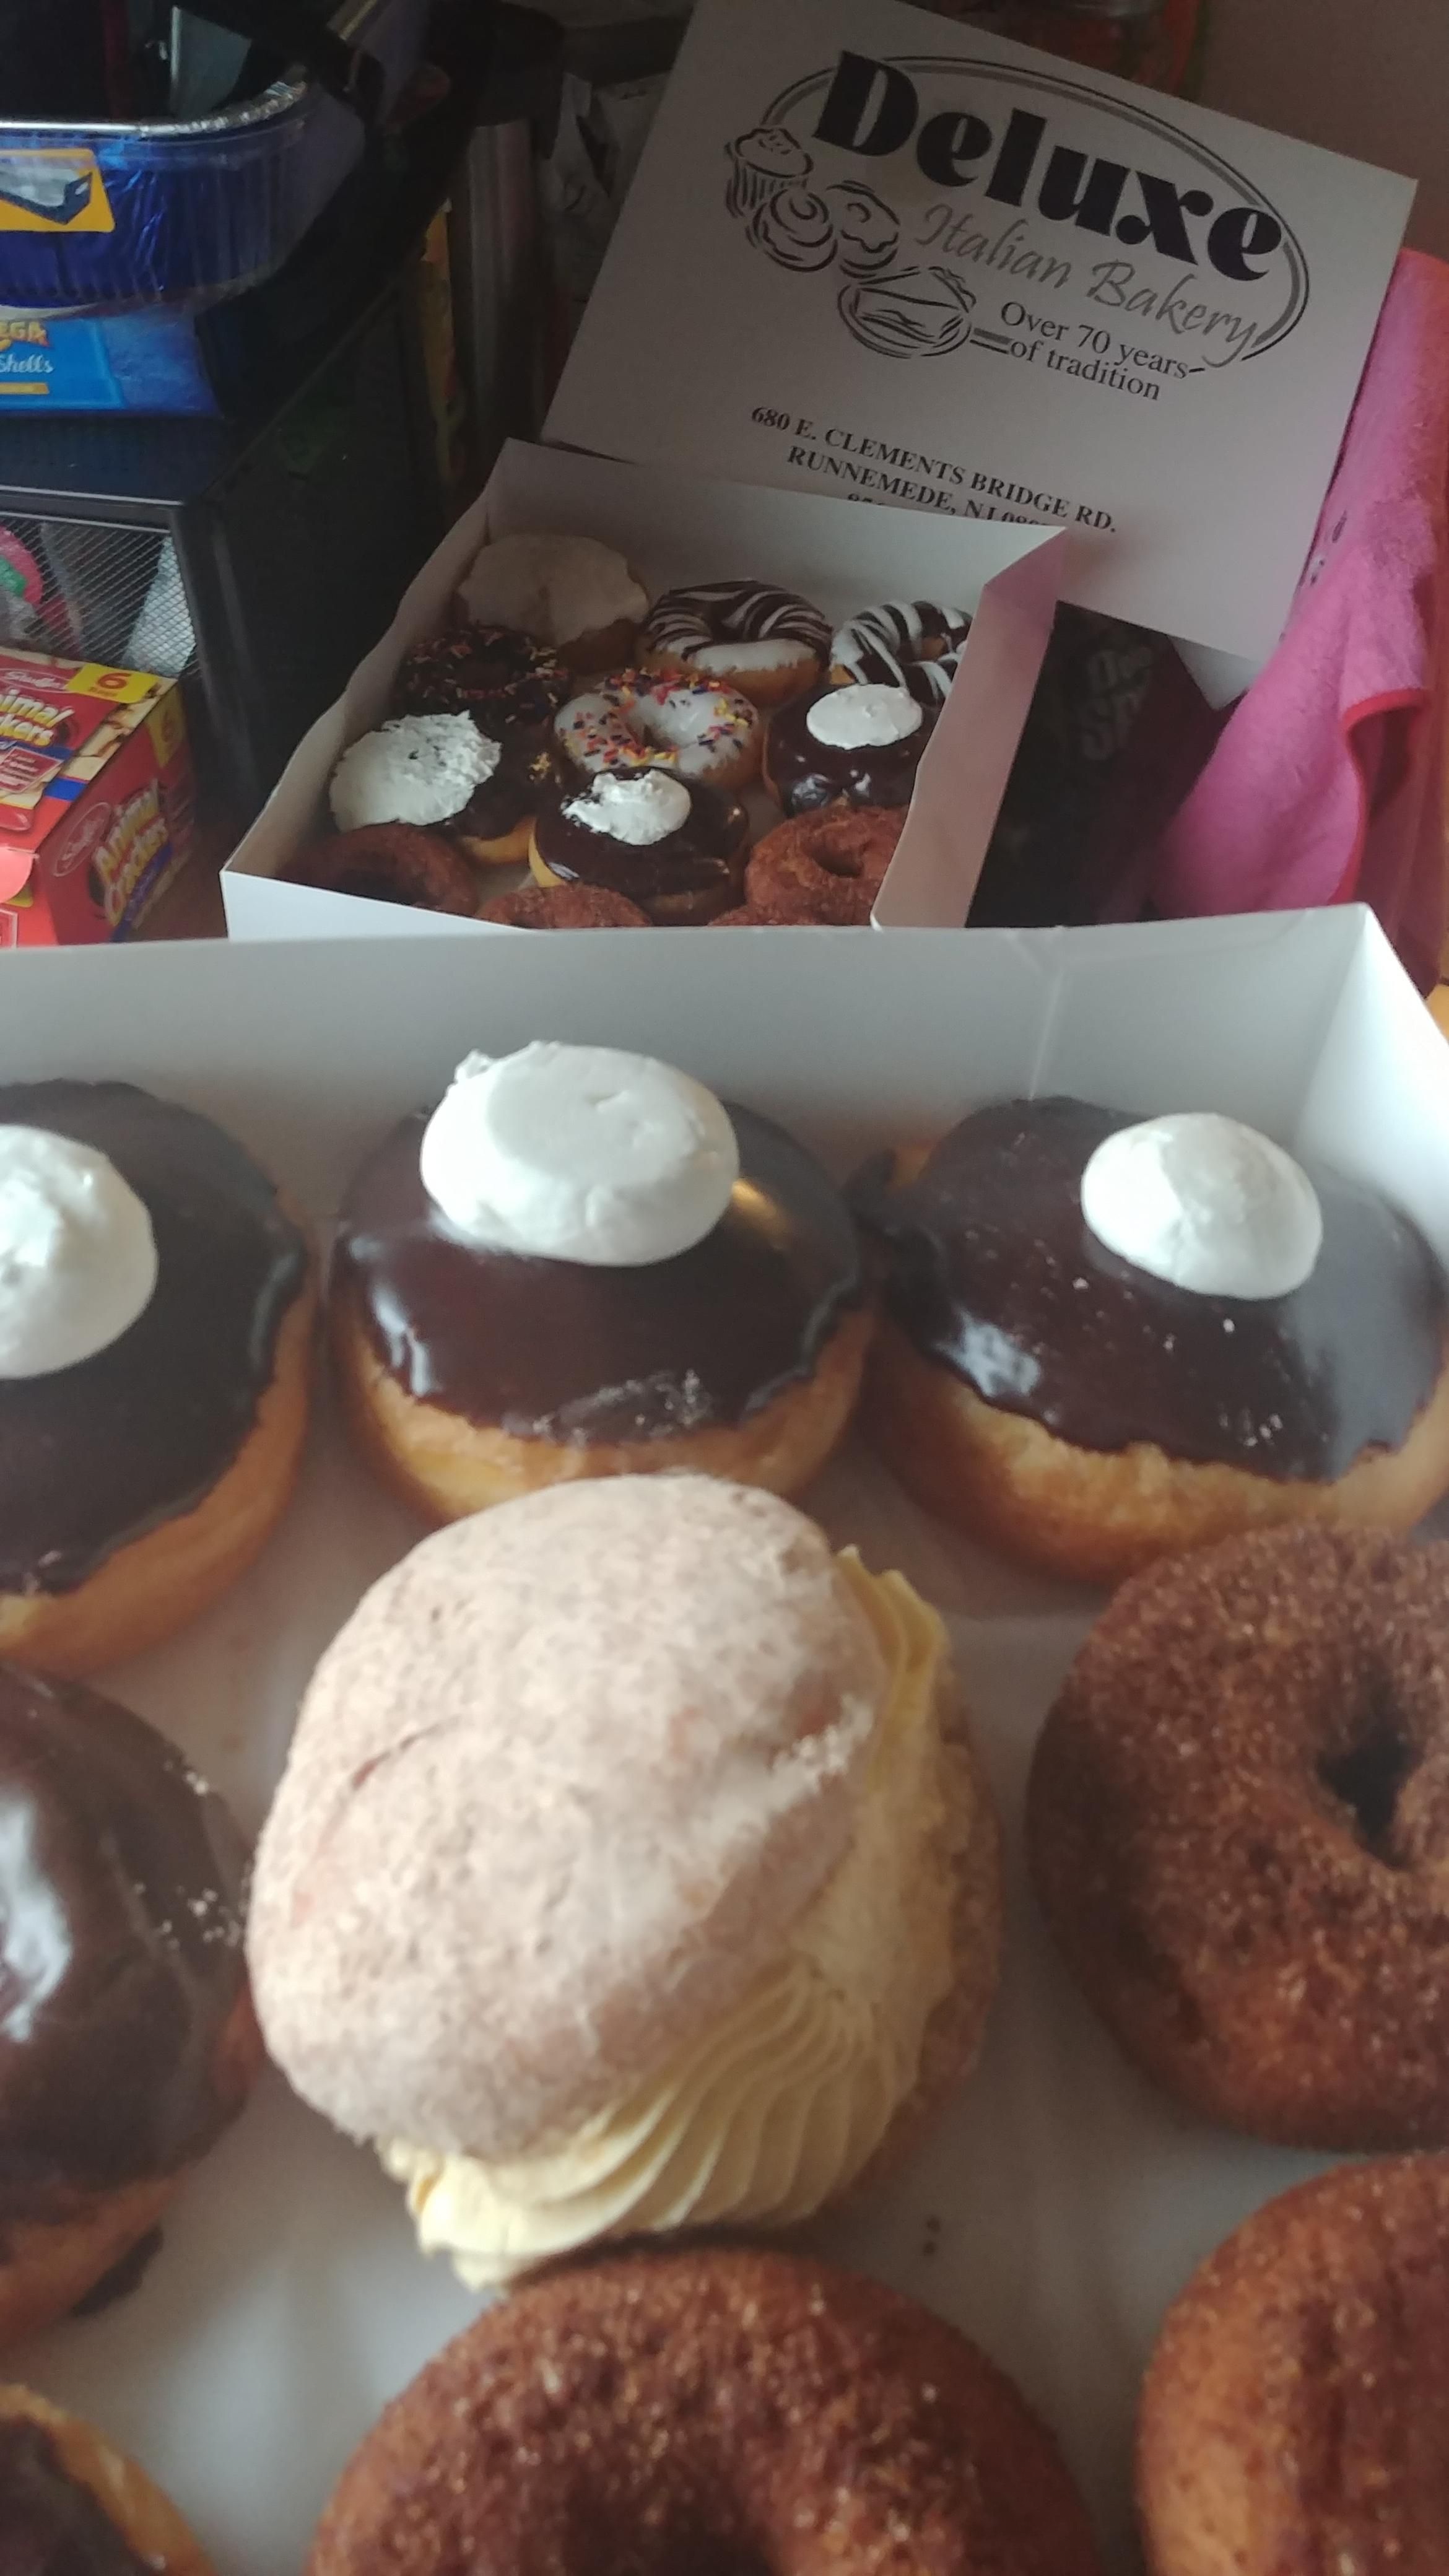 I thought it'd be a good idea to grab donuts after work. Apparently my wife thought the same thing.